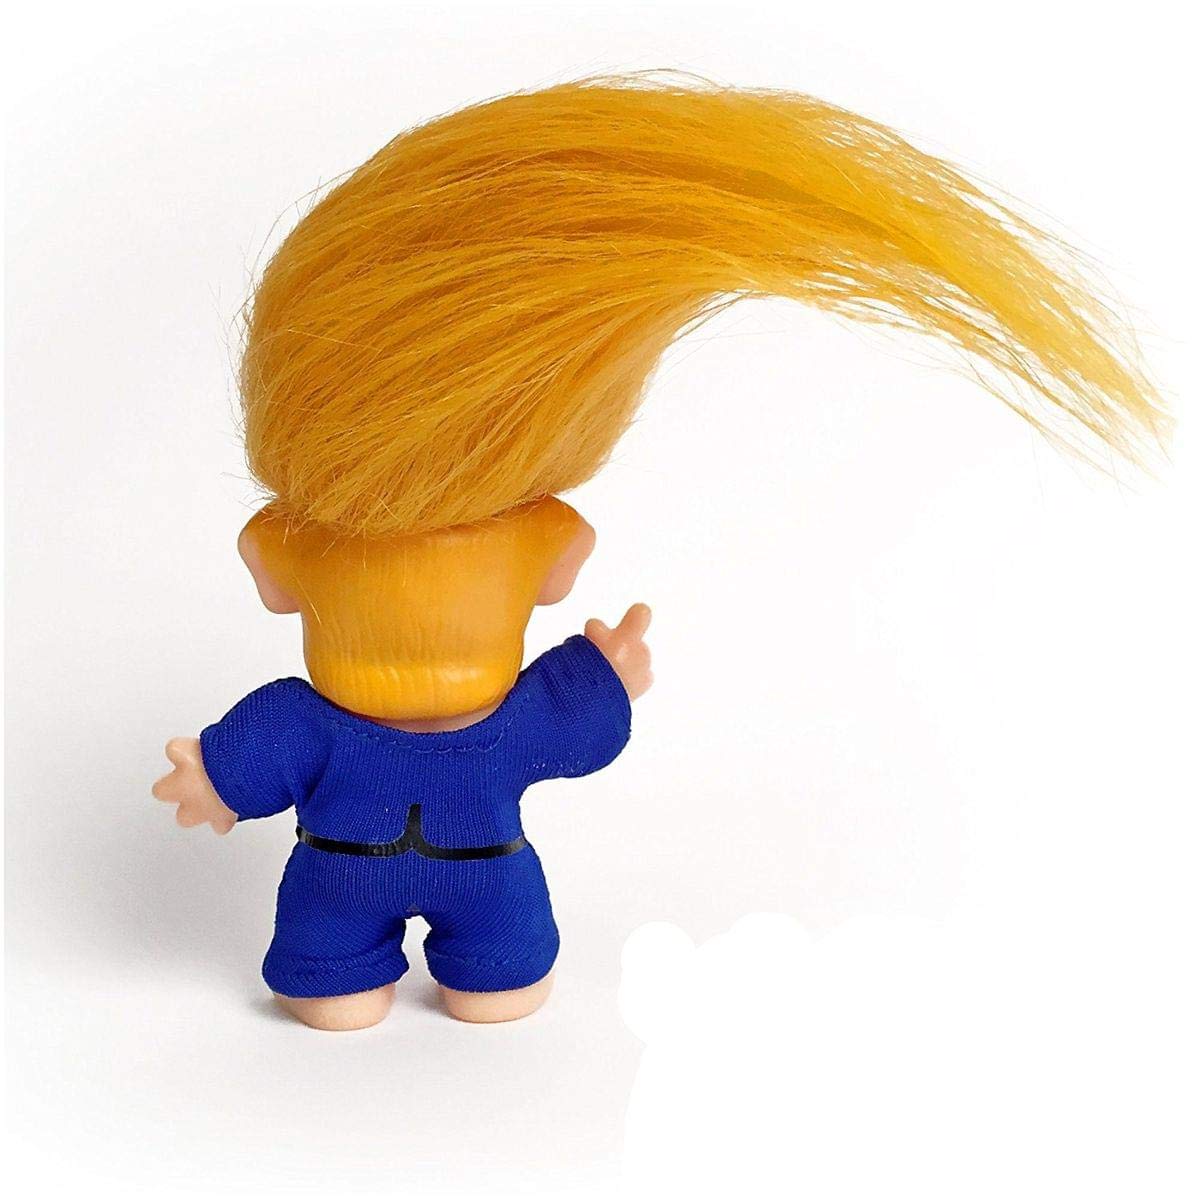 Collectible President Donald Trump Troll Doll - Hair to the Chief